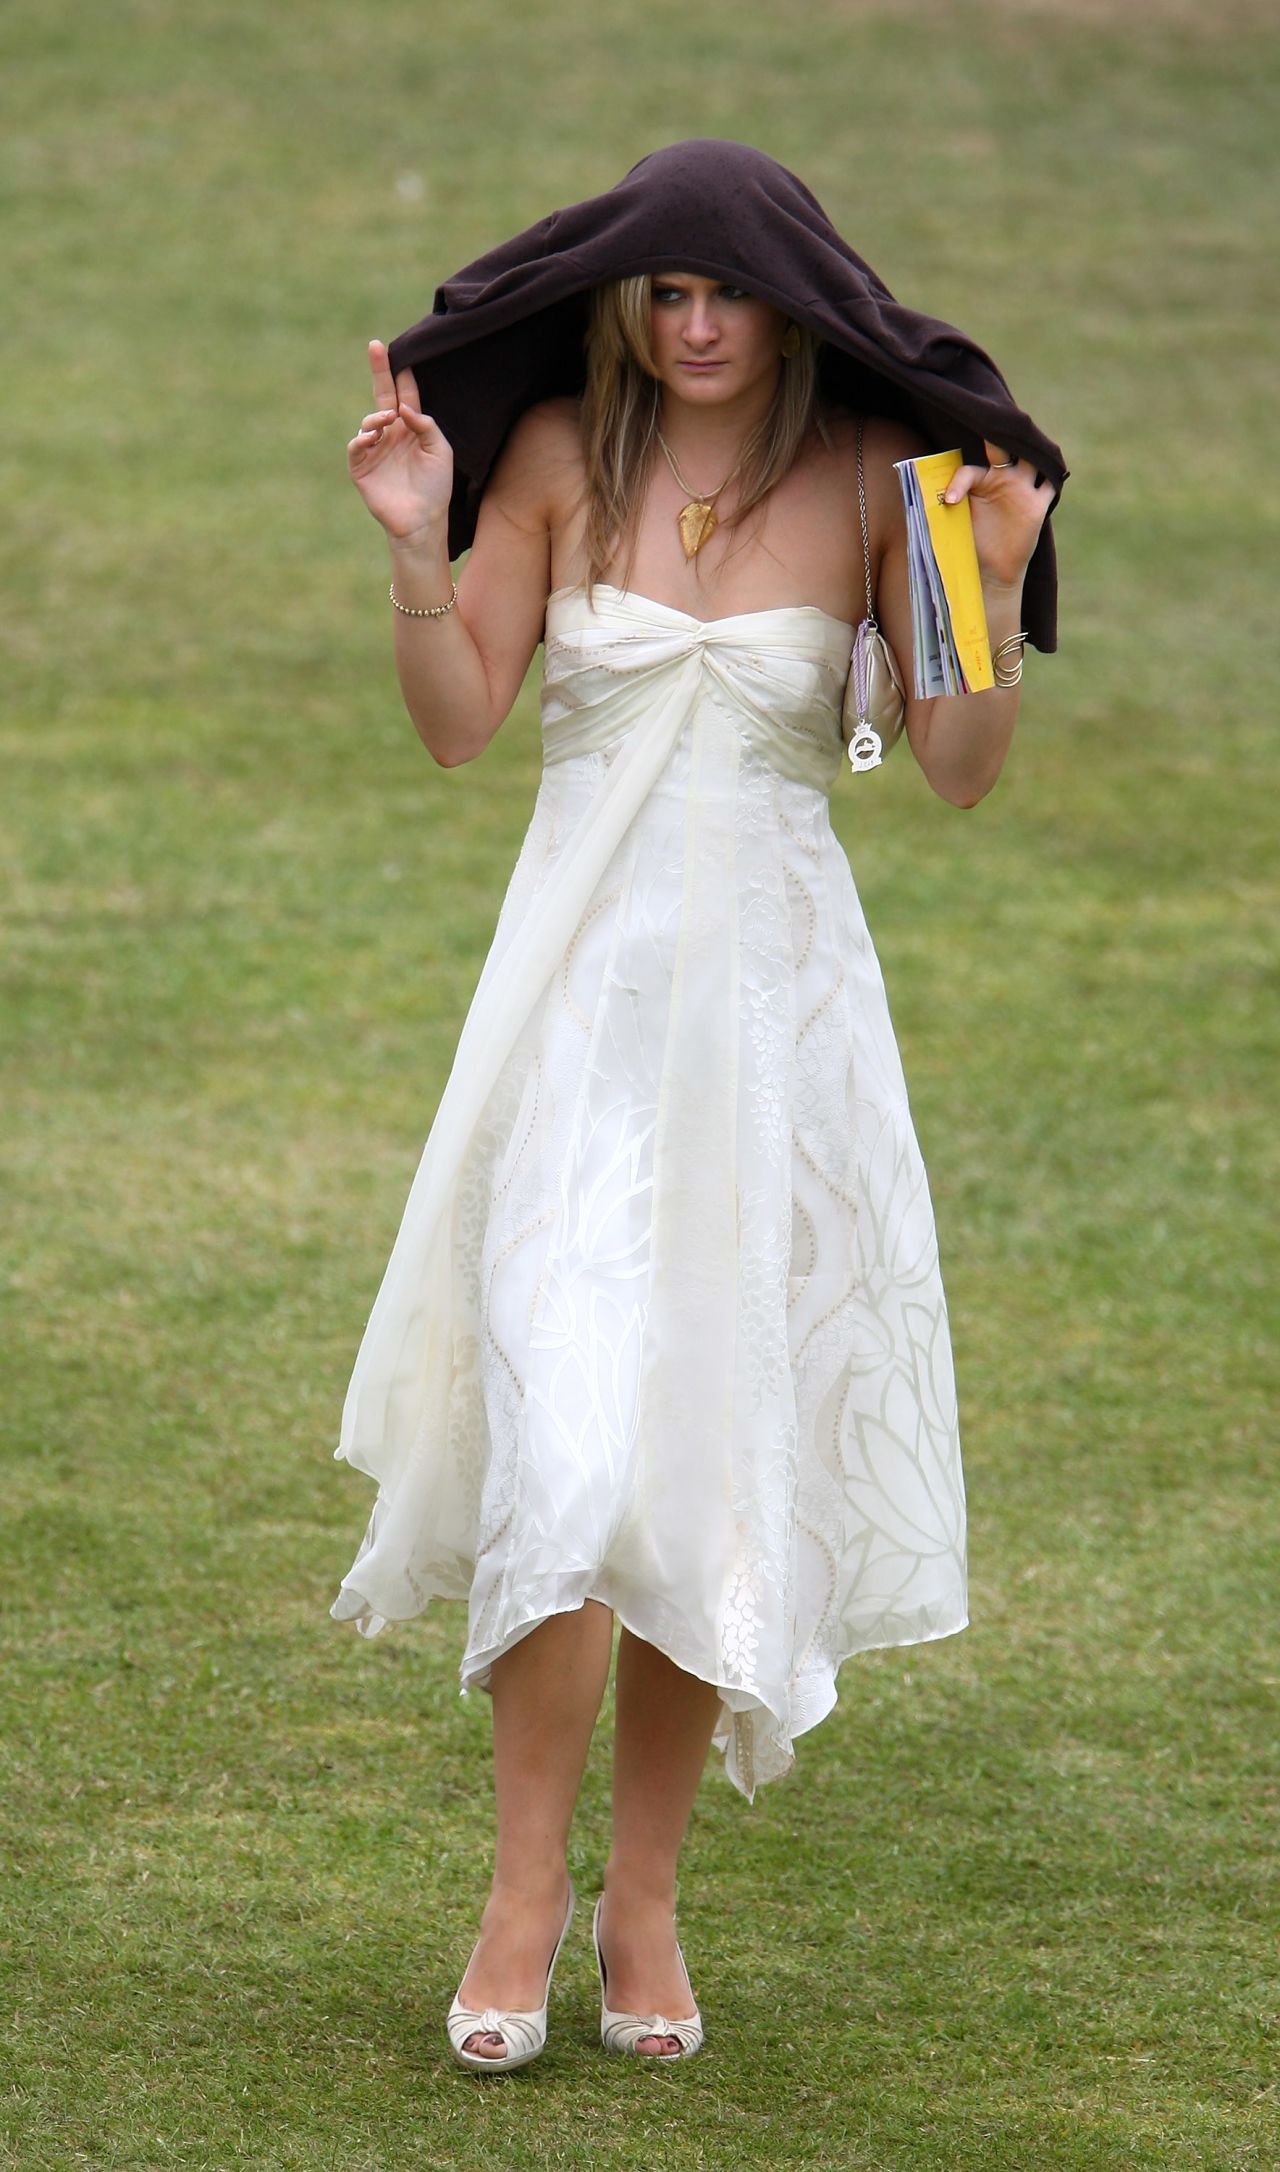 A female racegoer shelters from the rain at Glorious Goodwood where the English summer can often bring inclement weather.